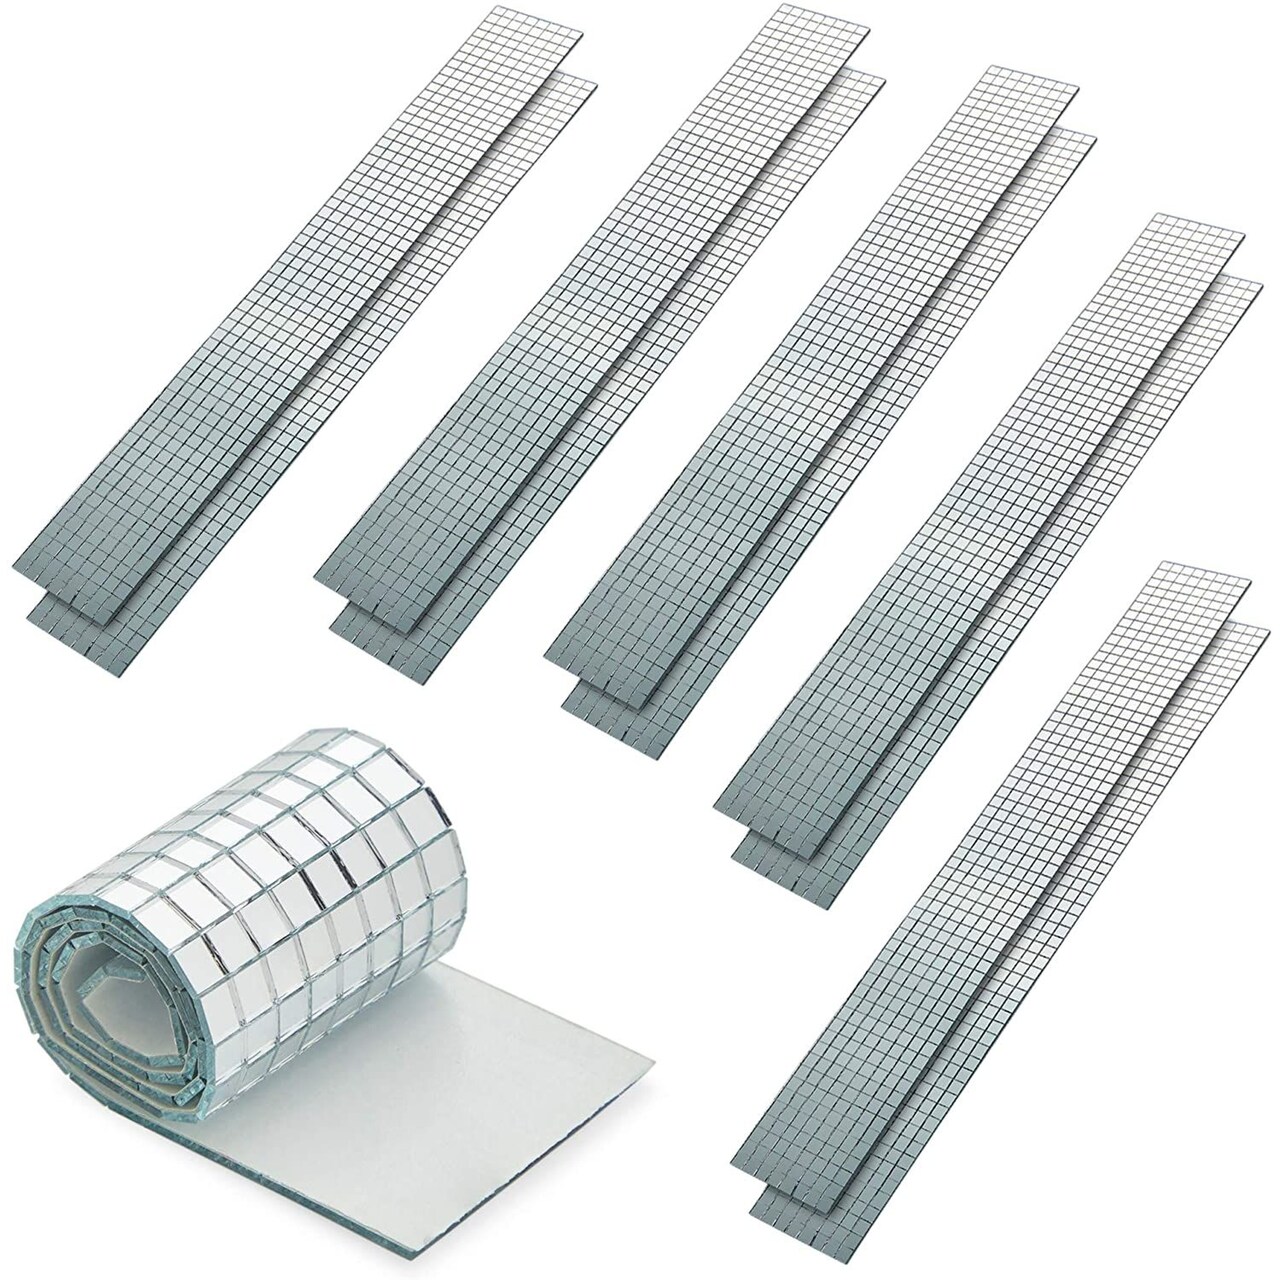 Silver Glass Mirror Tiles for Crafts, 5x5 mm Self-Adhesive